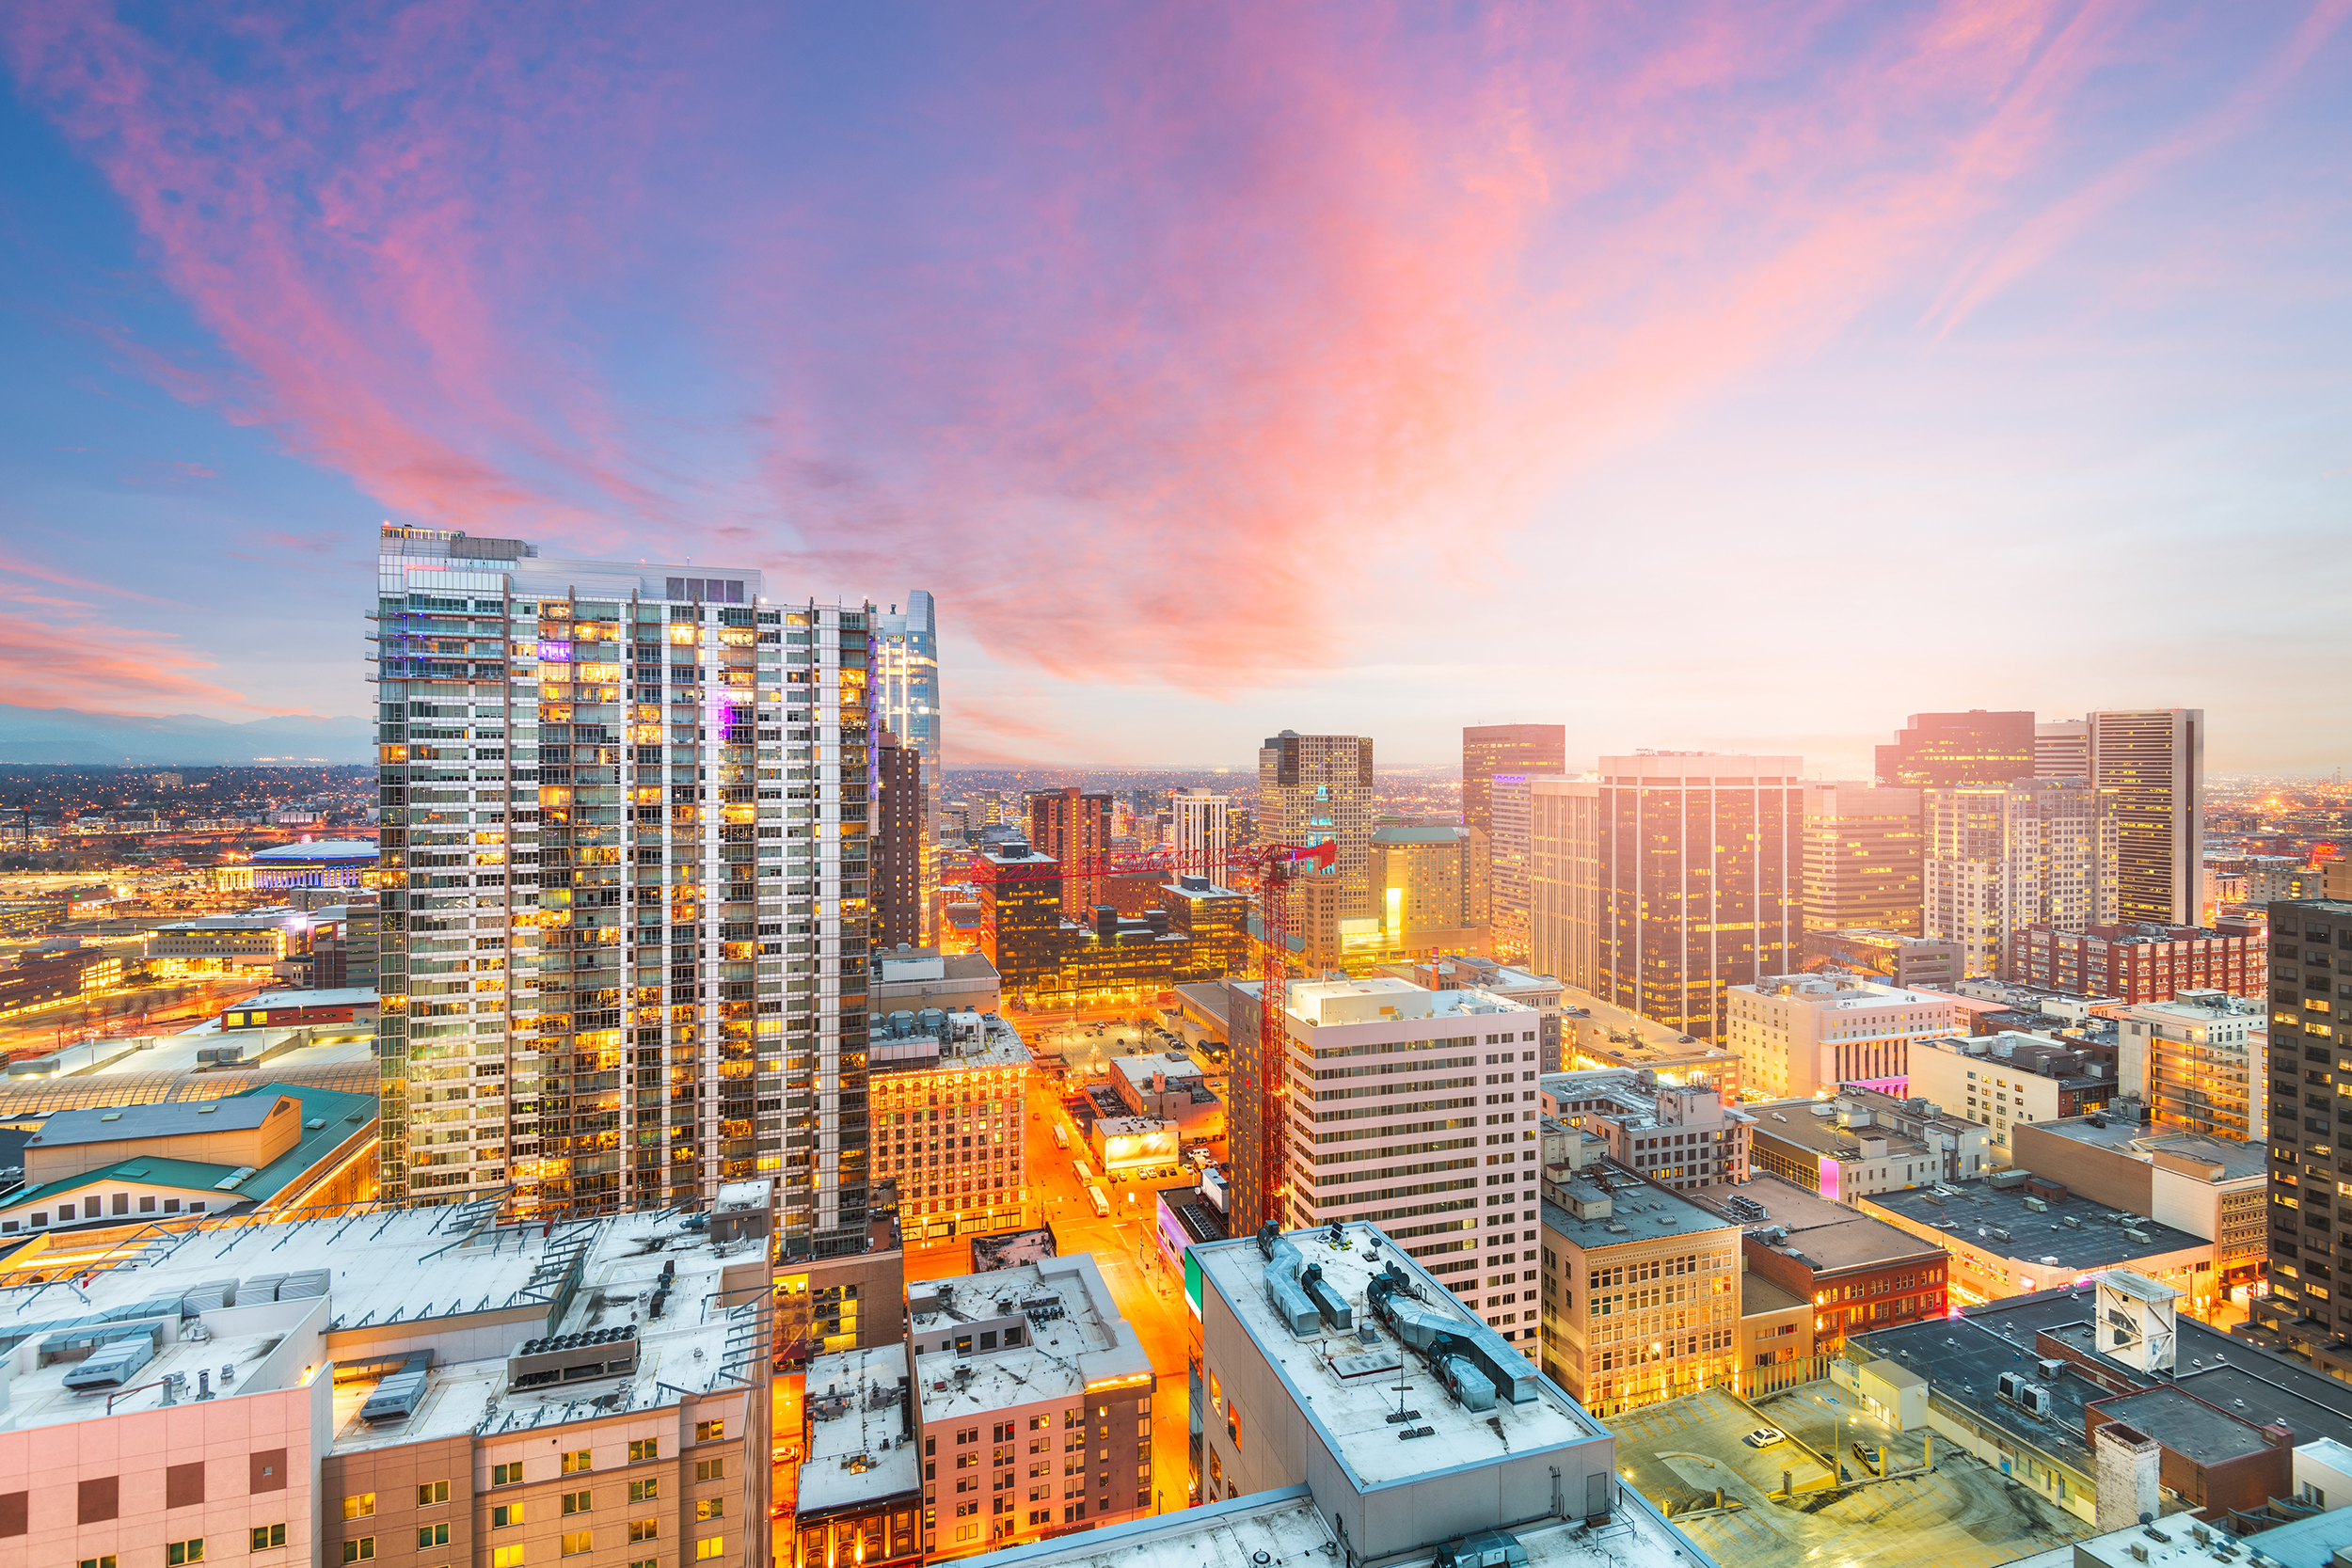 Experience the breathtaking cityscape of Denver at sunset.